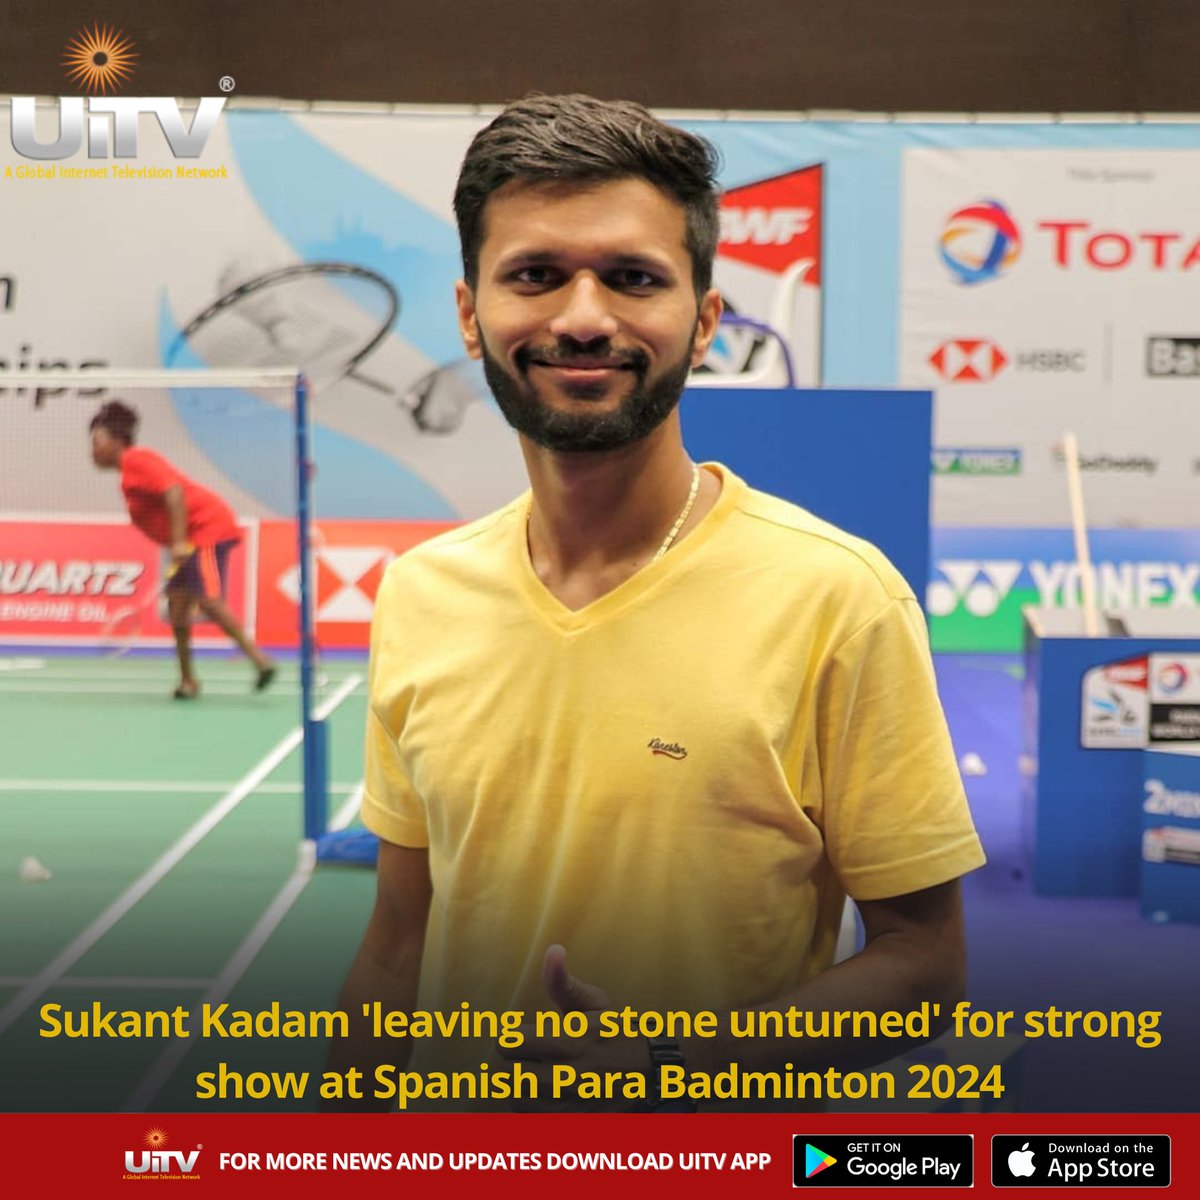 Sukant Kadam is leaving no stone unturned in his quest for glory at the Spanish Para Badminton 2024! His dedication and hard work are truly inspiring. #ParaBadminton #SukantKadam #RoadToGlory #HardWorkPaysOff #Inspiration #SpanishParaBadminton2024 🏸💪🔥